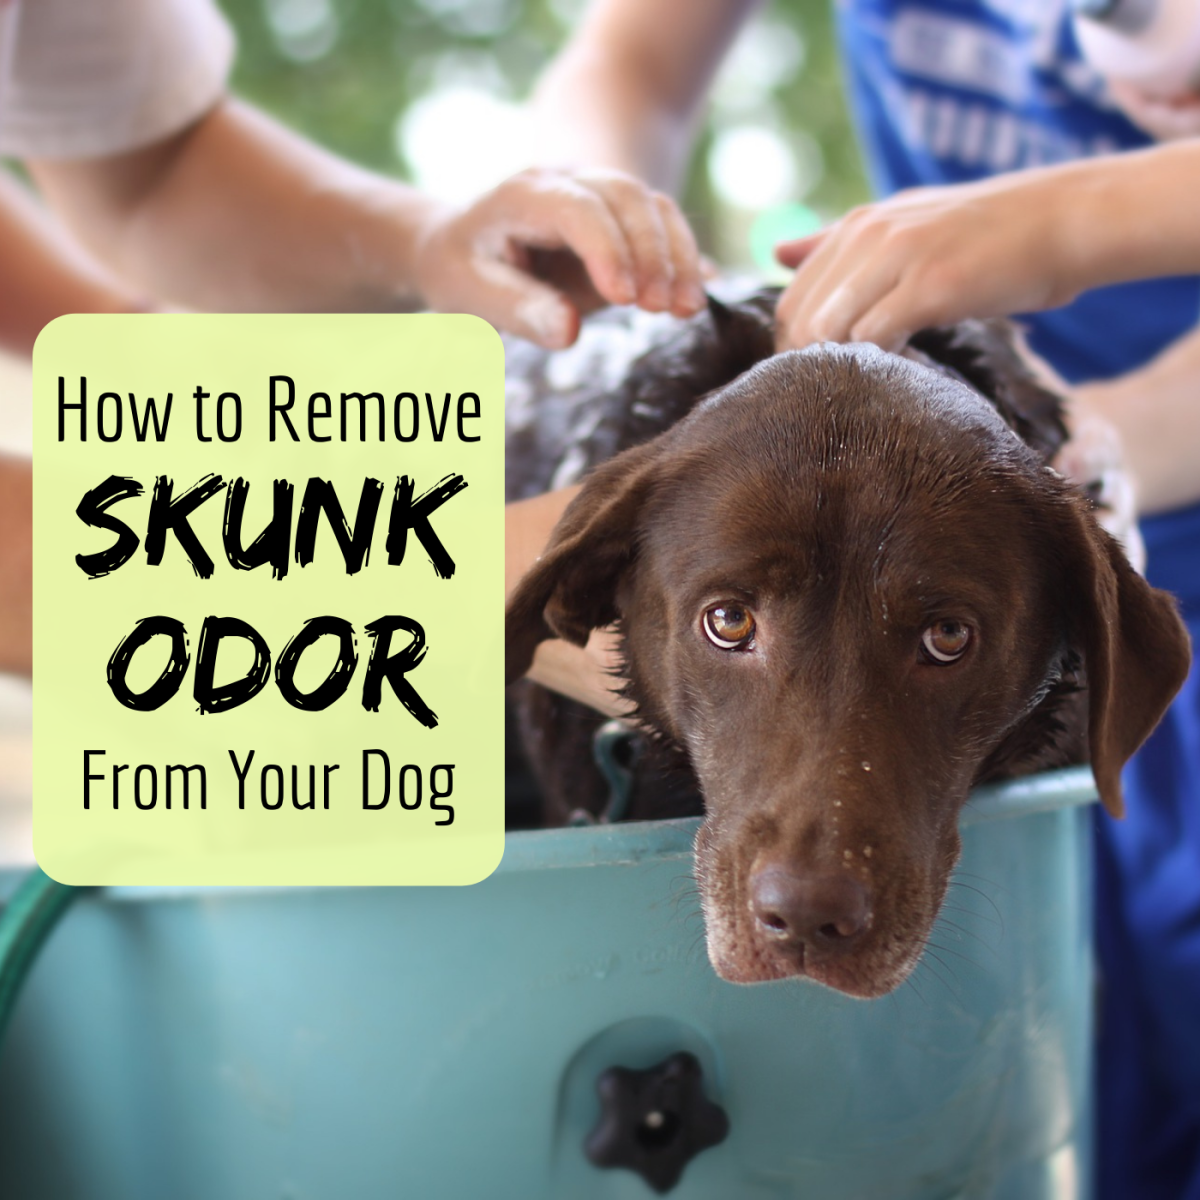 This is a tried and true recipe to remove the skunk smell off your dog. It works great and is very inexpensive!